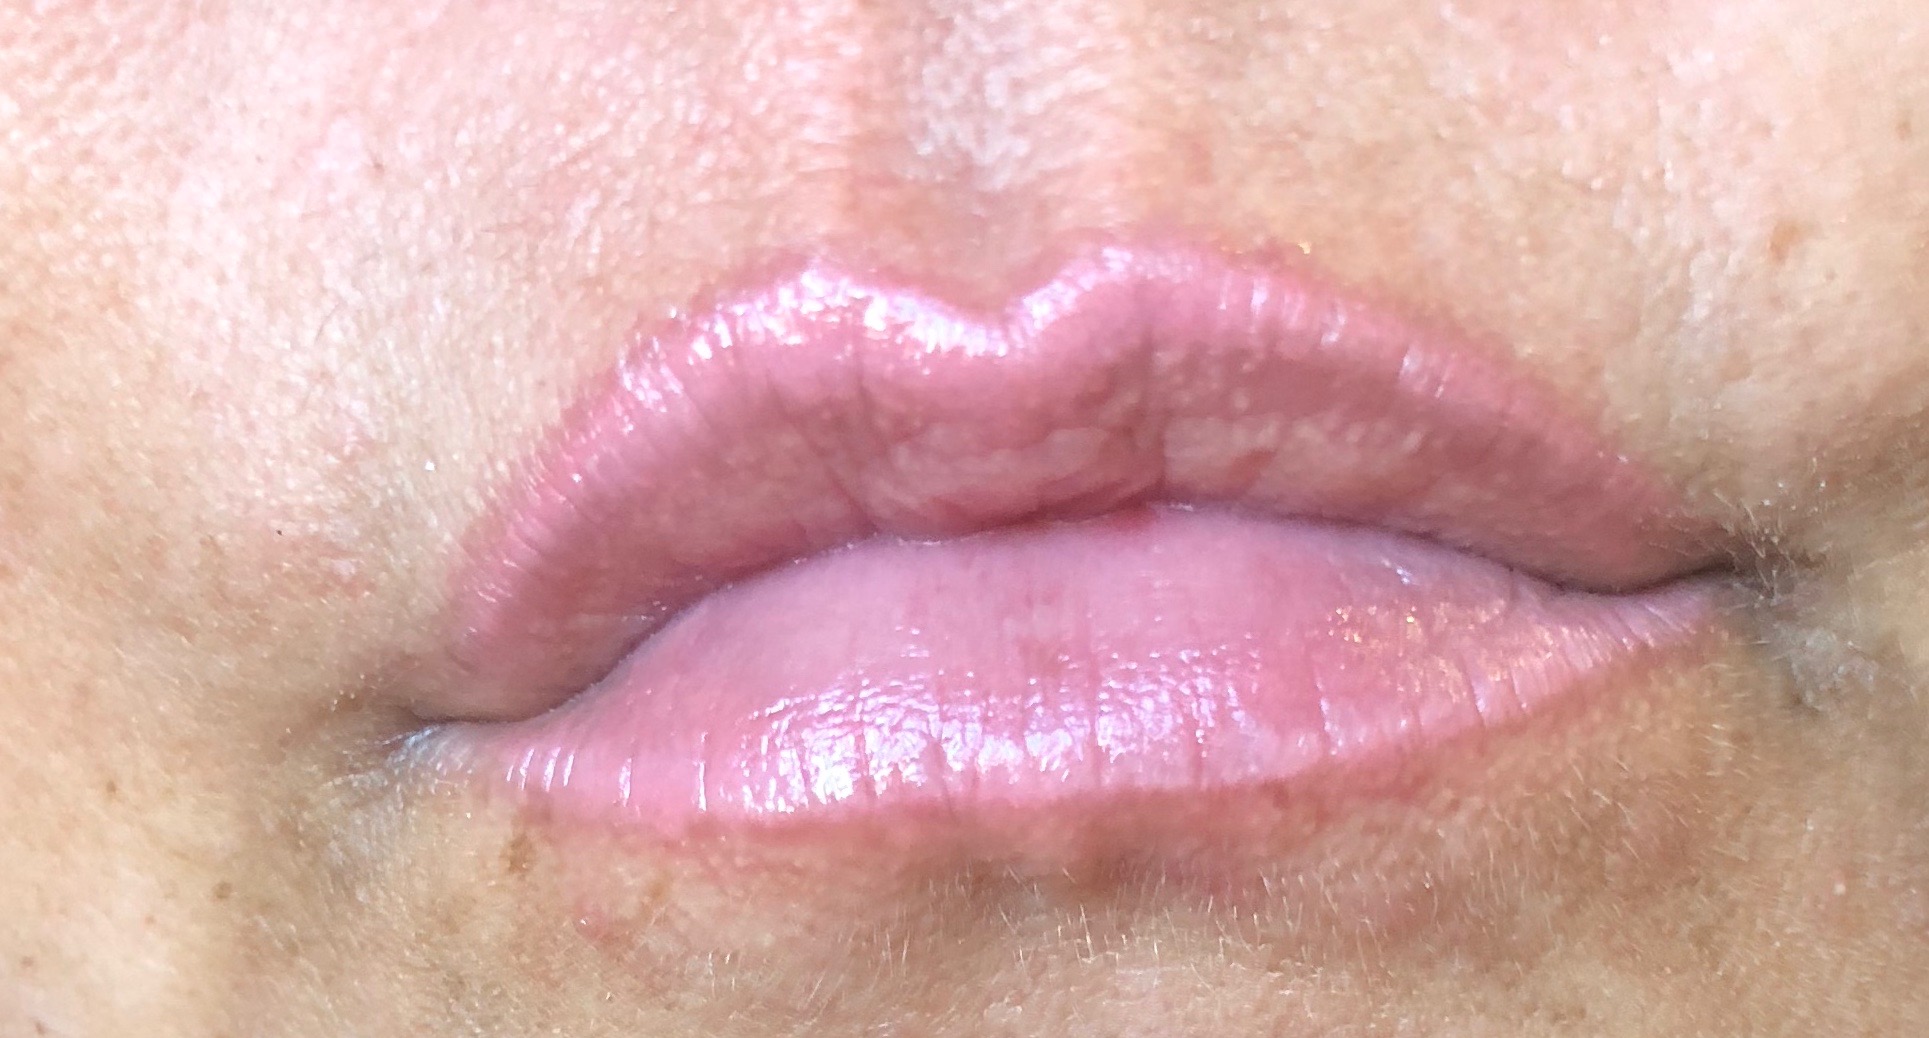 Tammy 1 day after Permanent Lip Enhancement-1